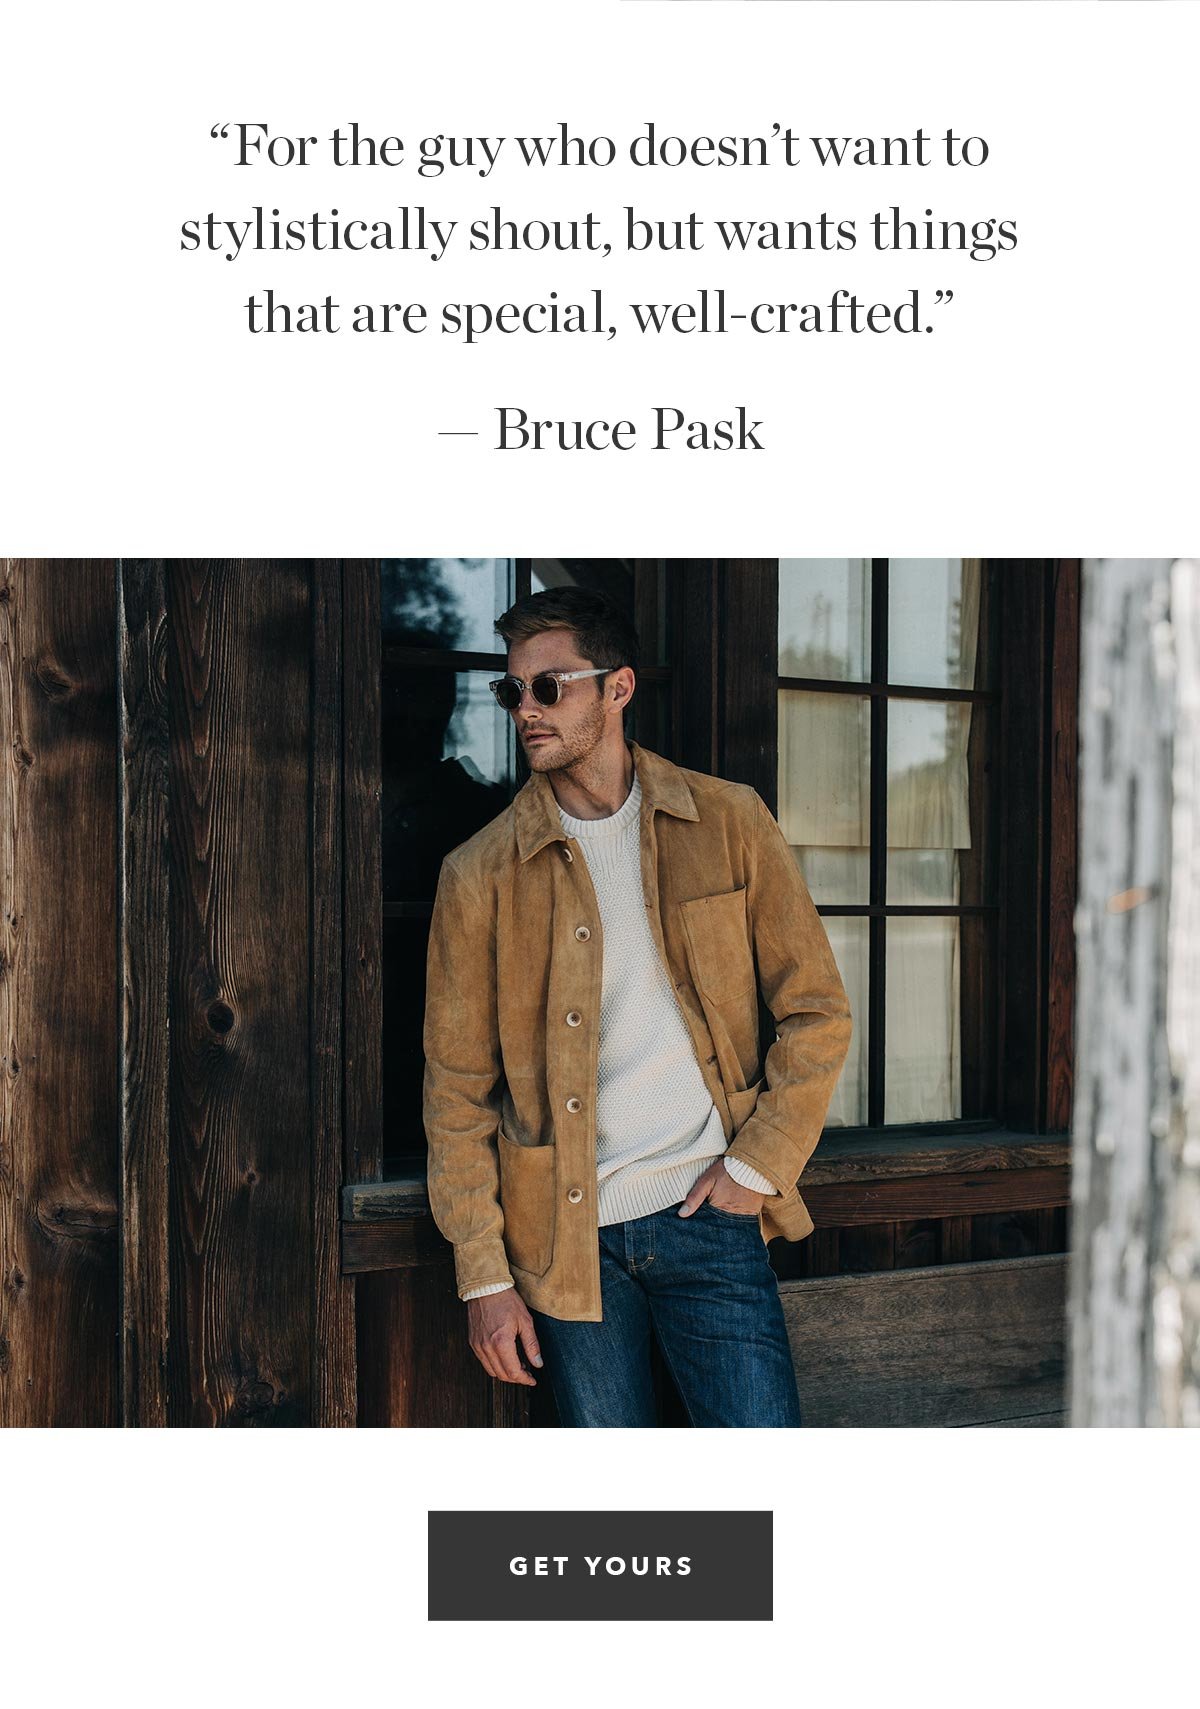  “For the guy who doesn’t want to stylistically shout, but wants things that are special, well-crafted.” — Bruce Pask